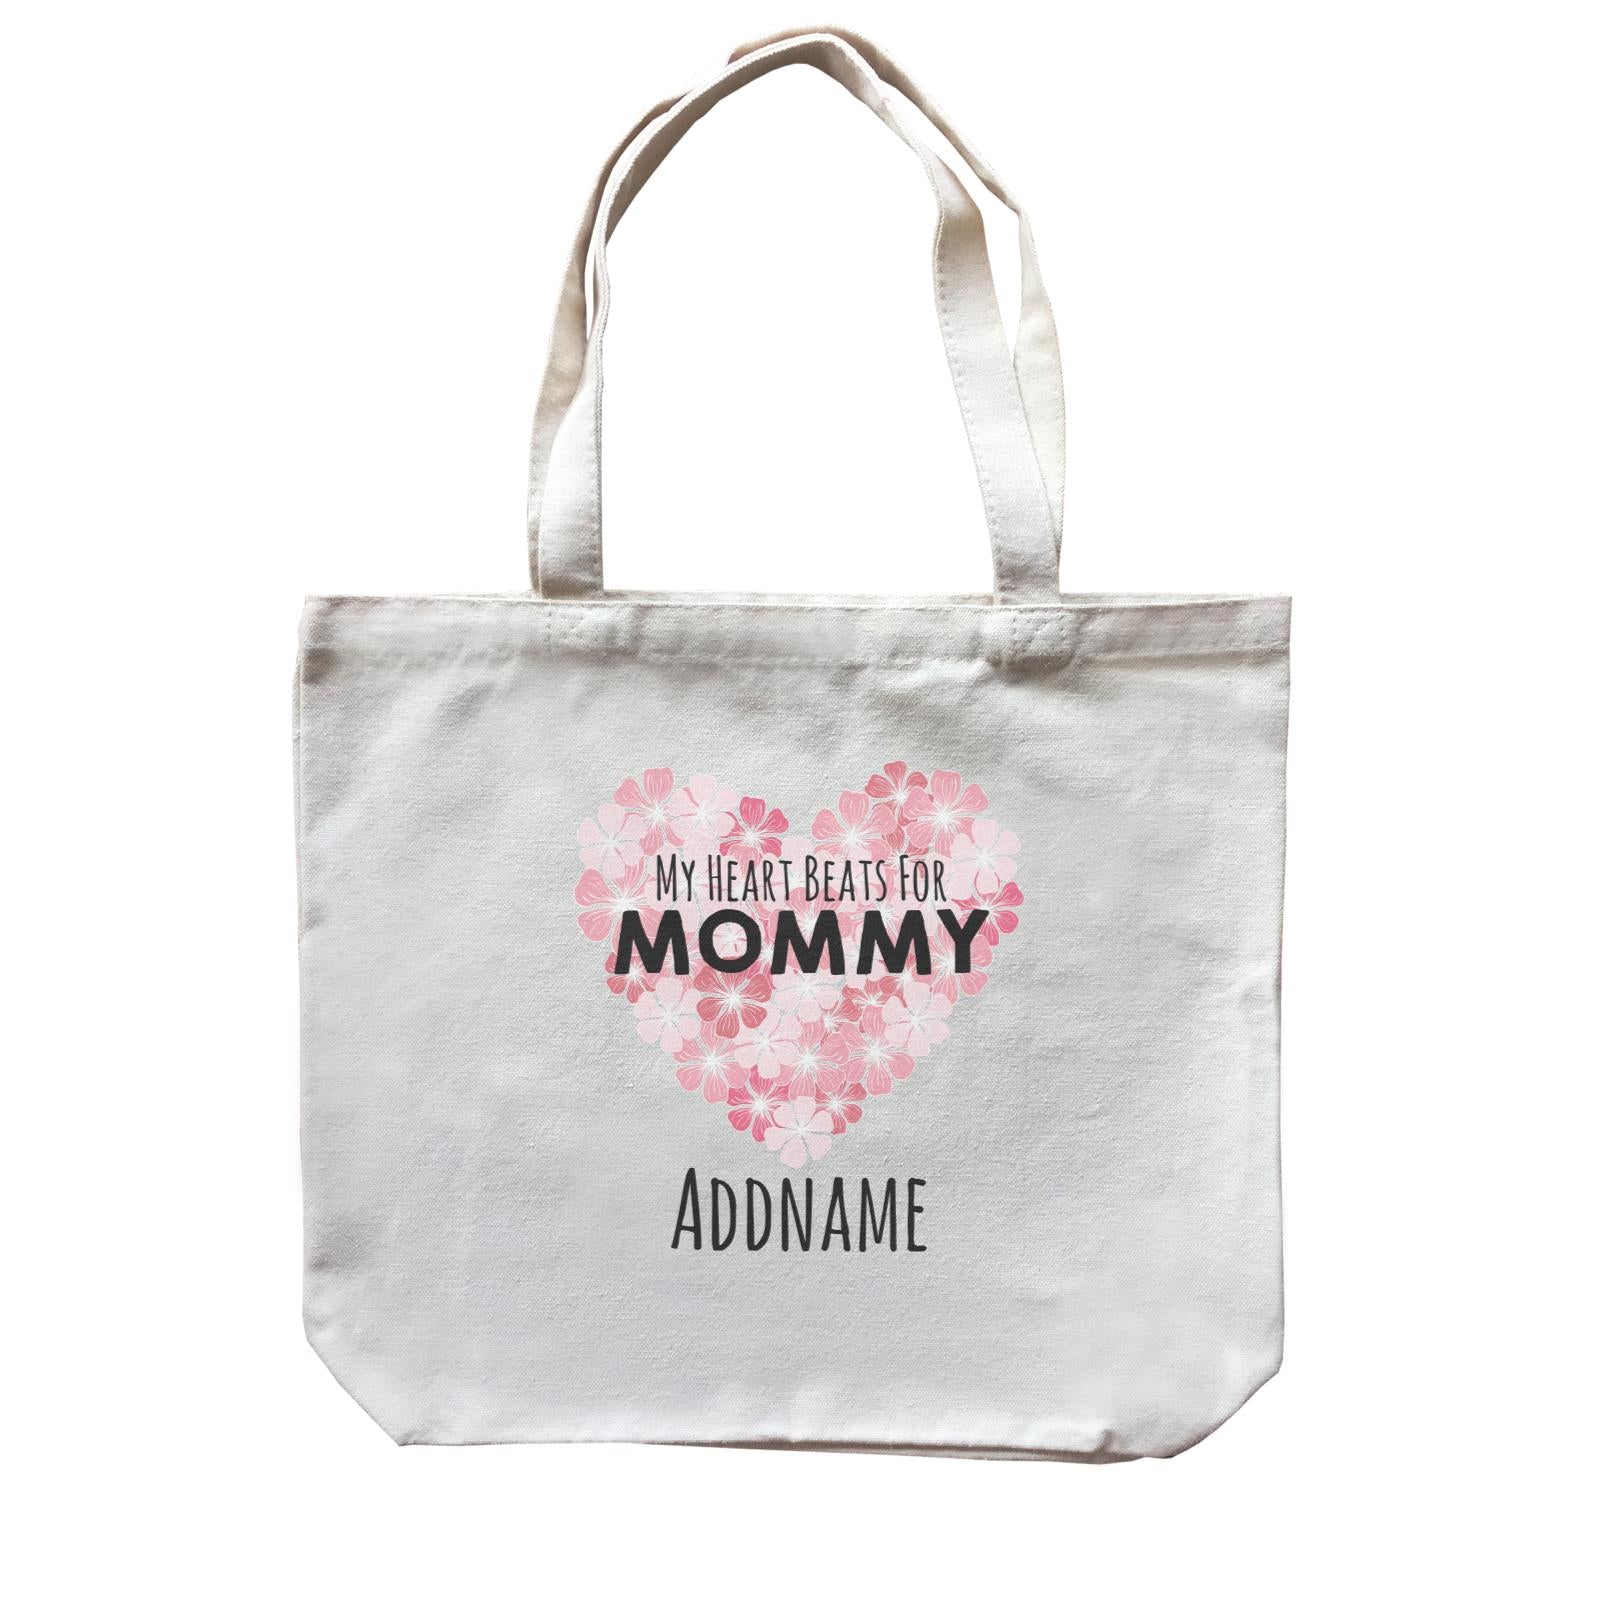 Drawn Mom & Dad Love Heart Beats for Mommy Addname Canvas Bag